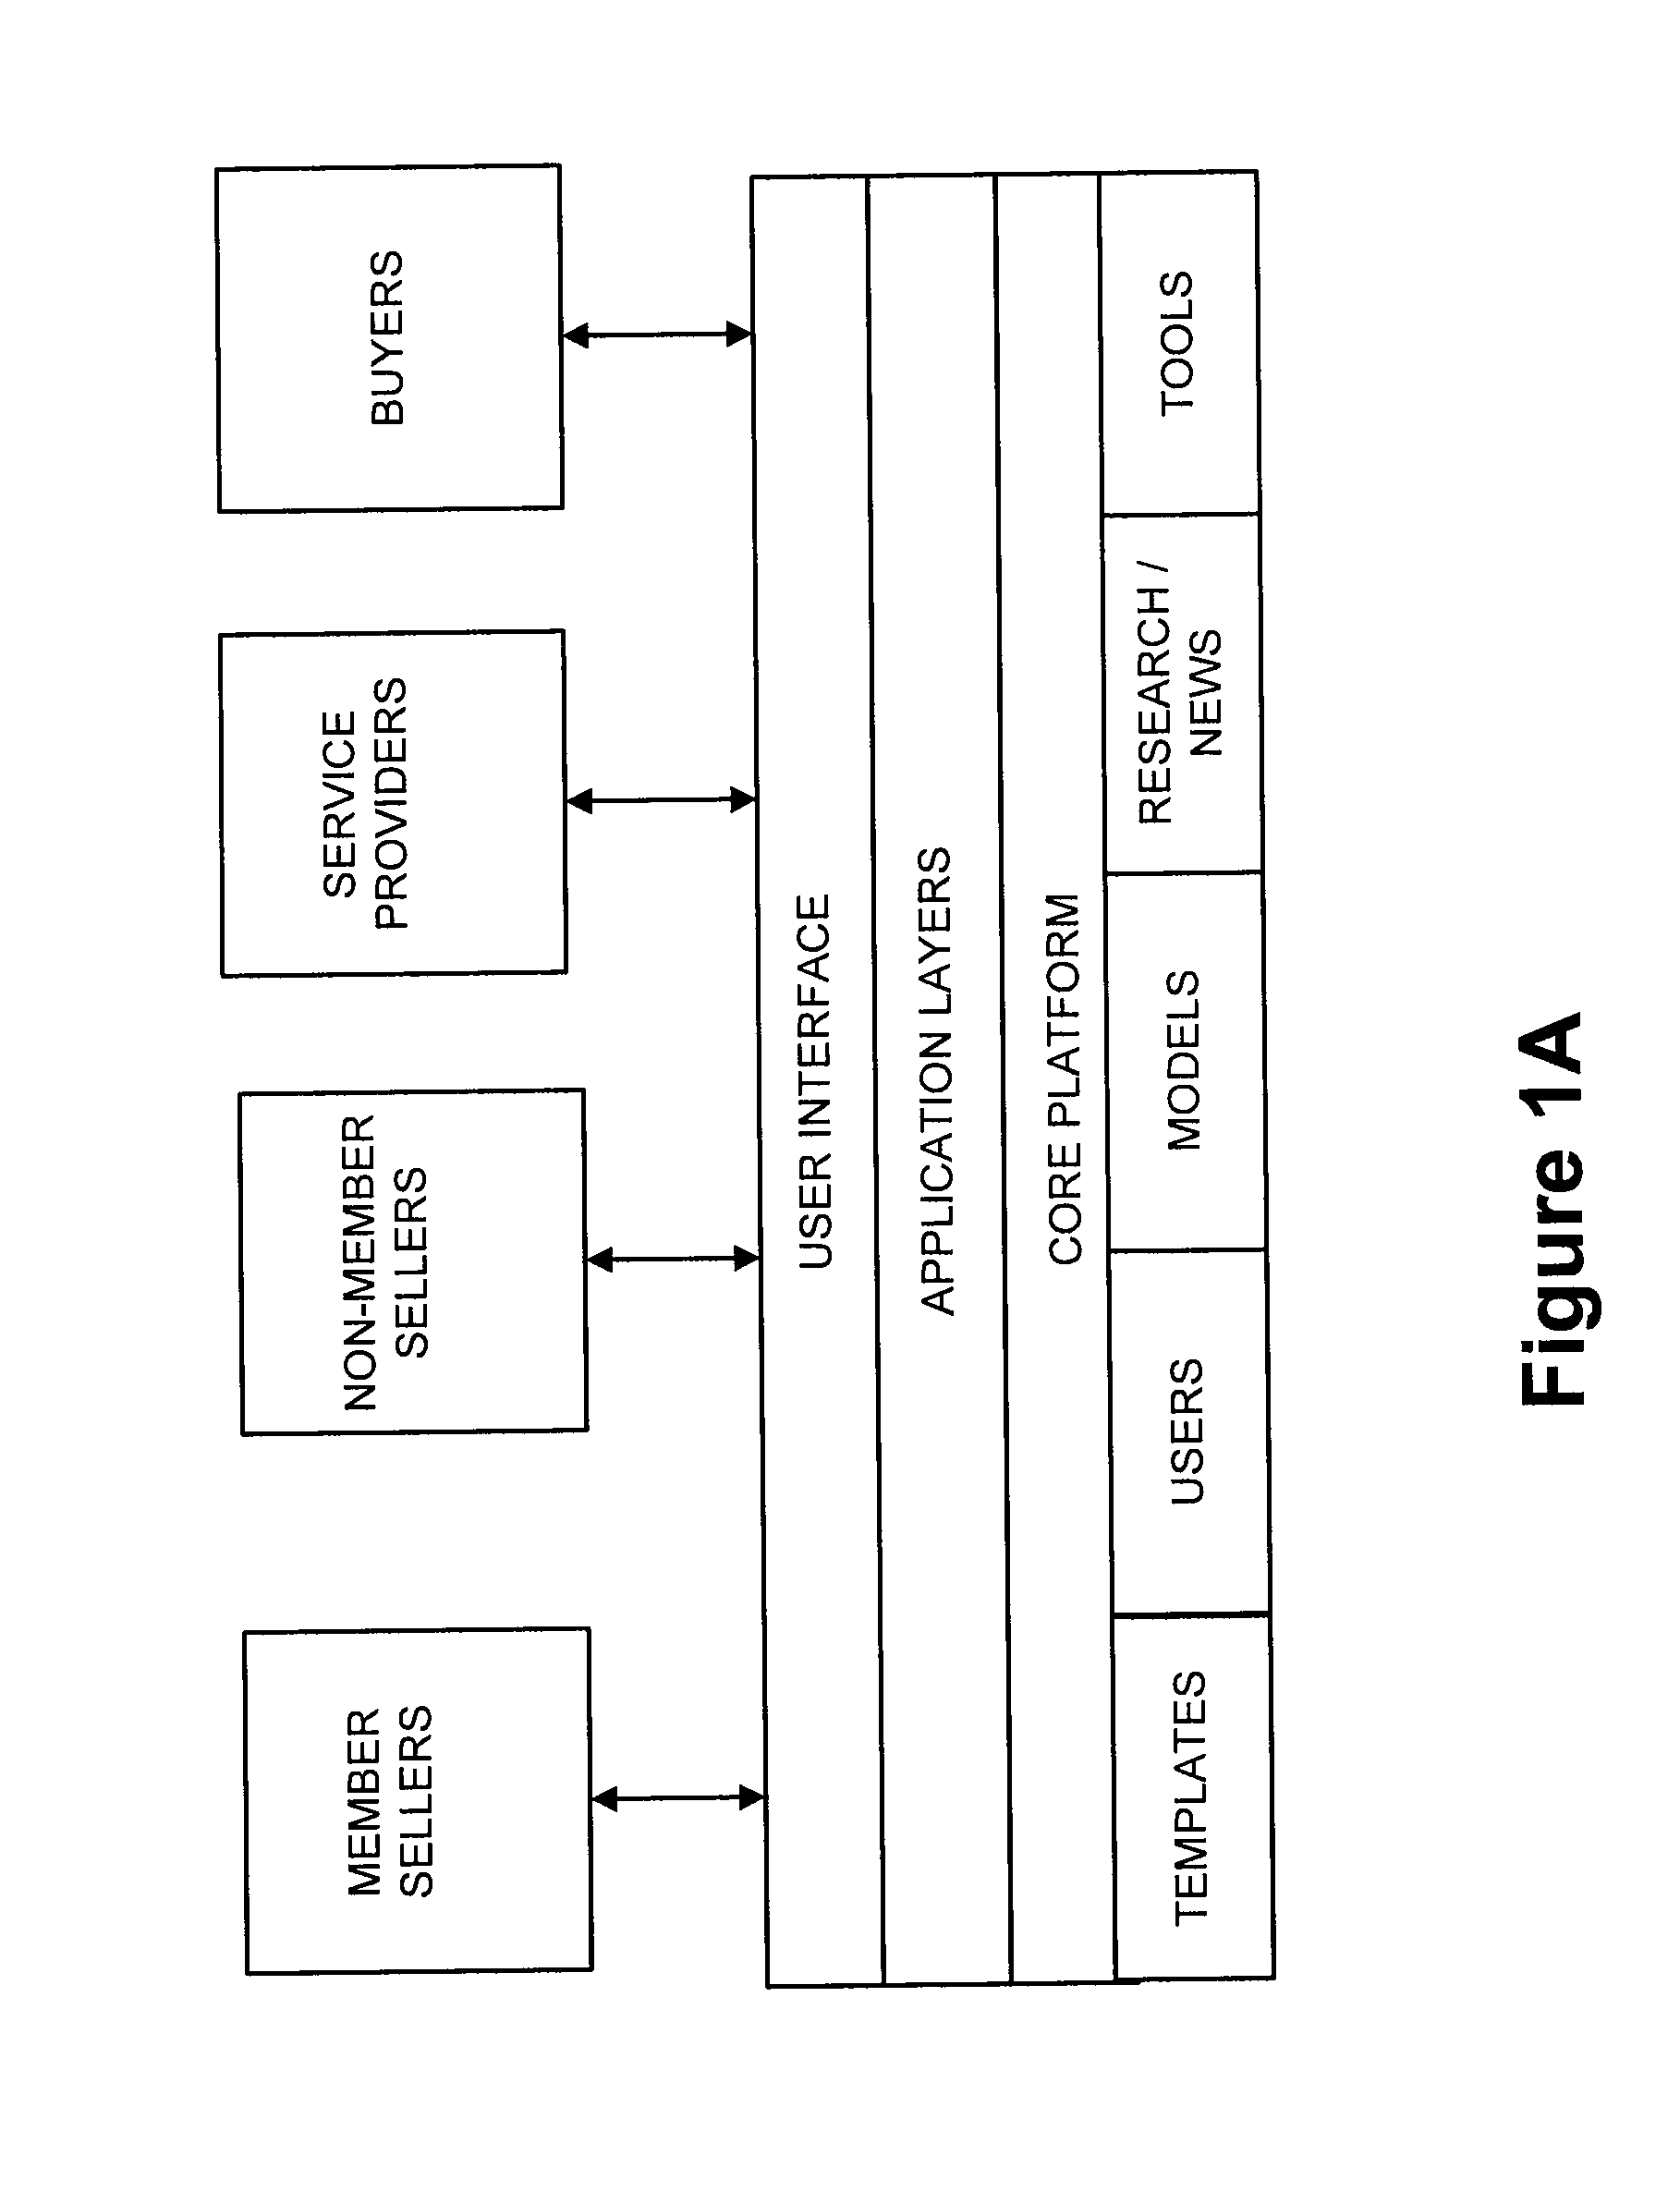 System and method for enabling an intellectual property transaction